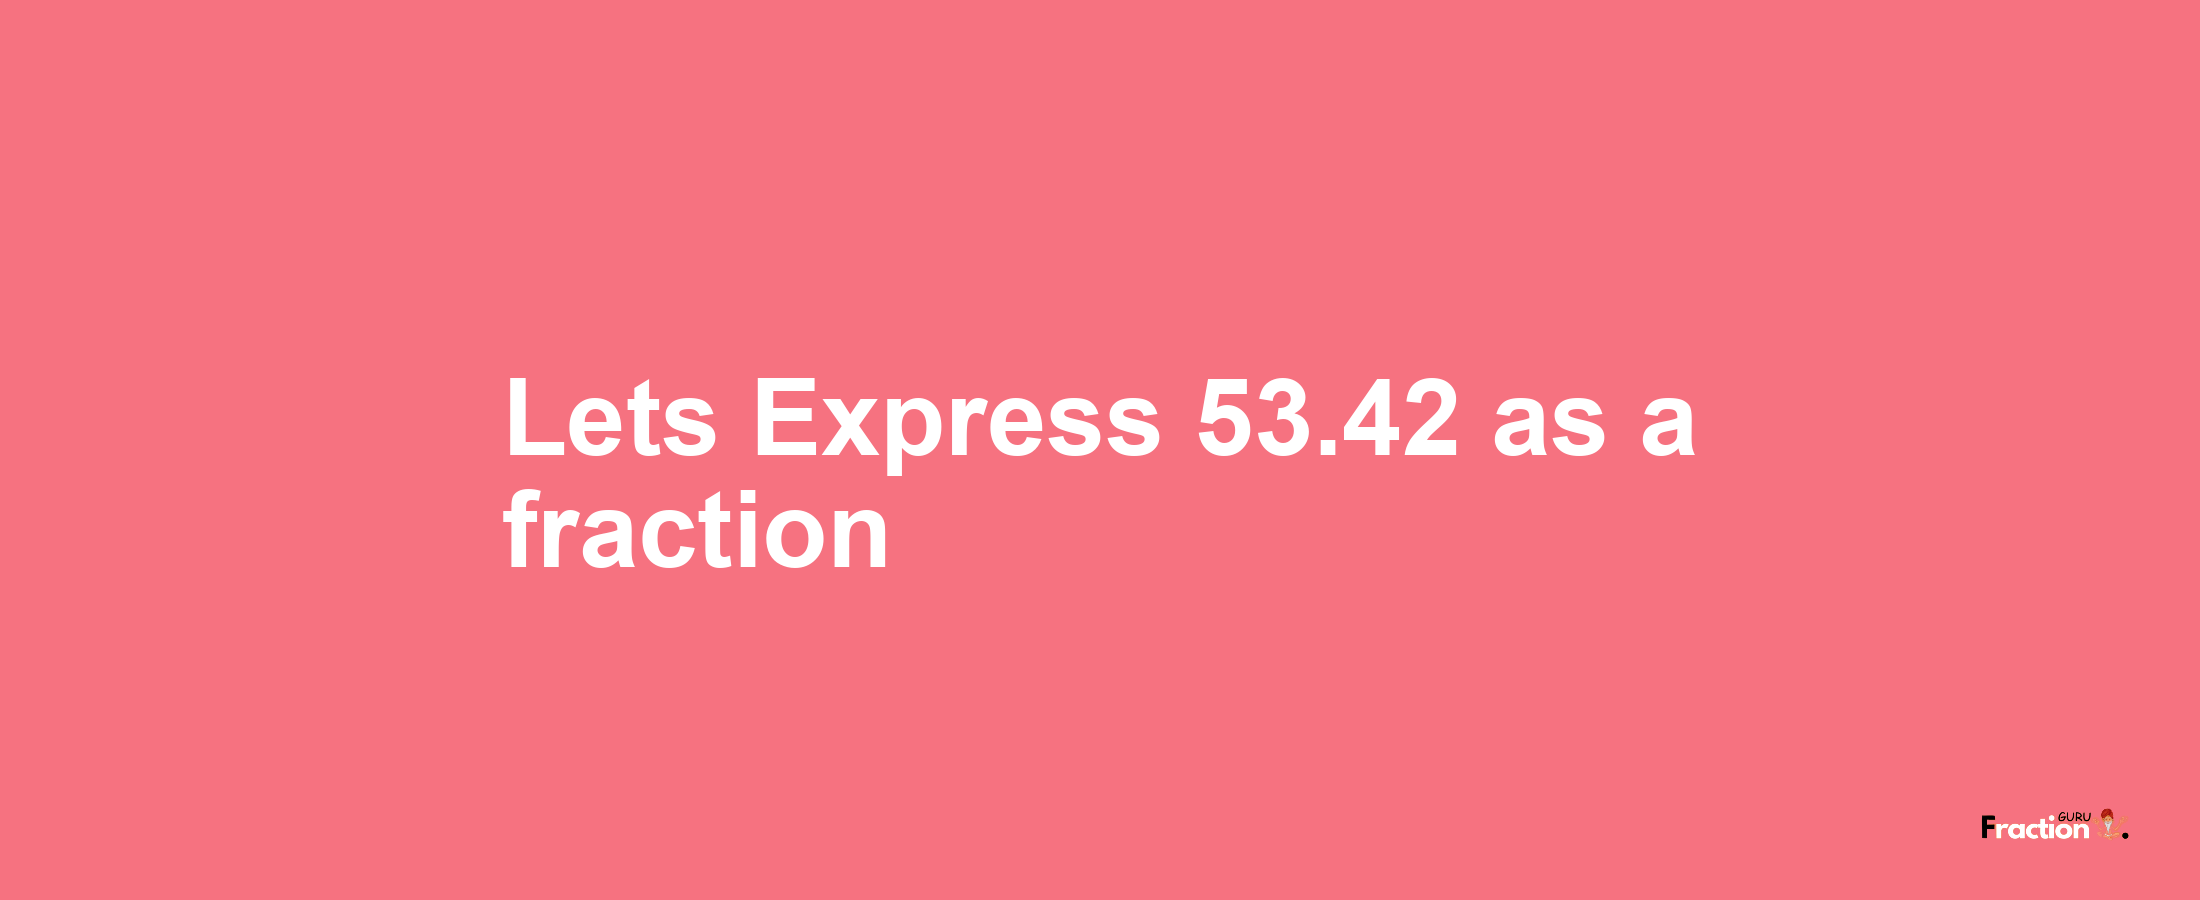 Lets Express 53.42 as afraction